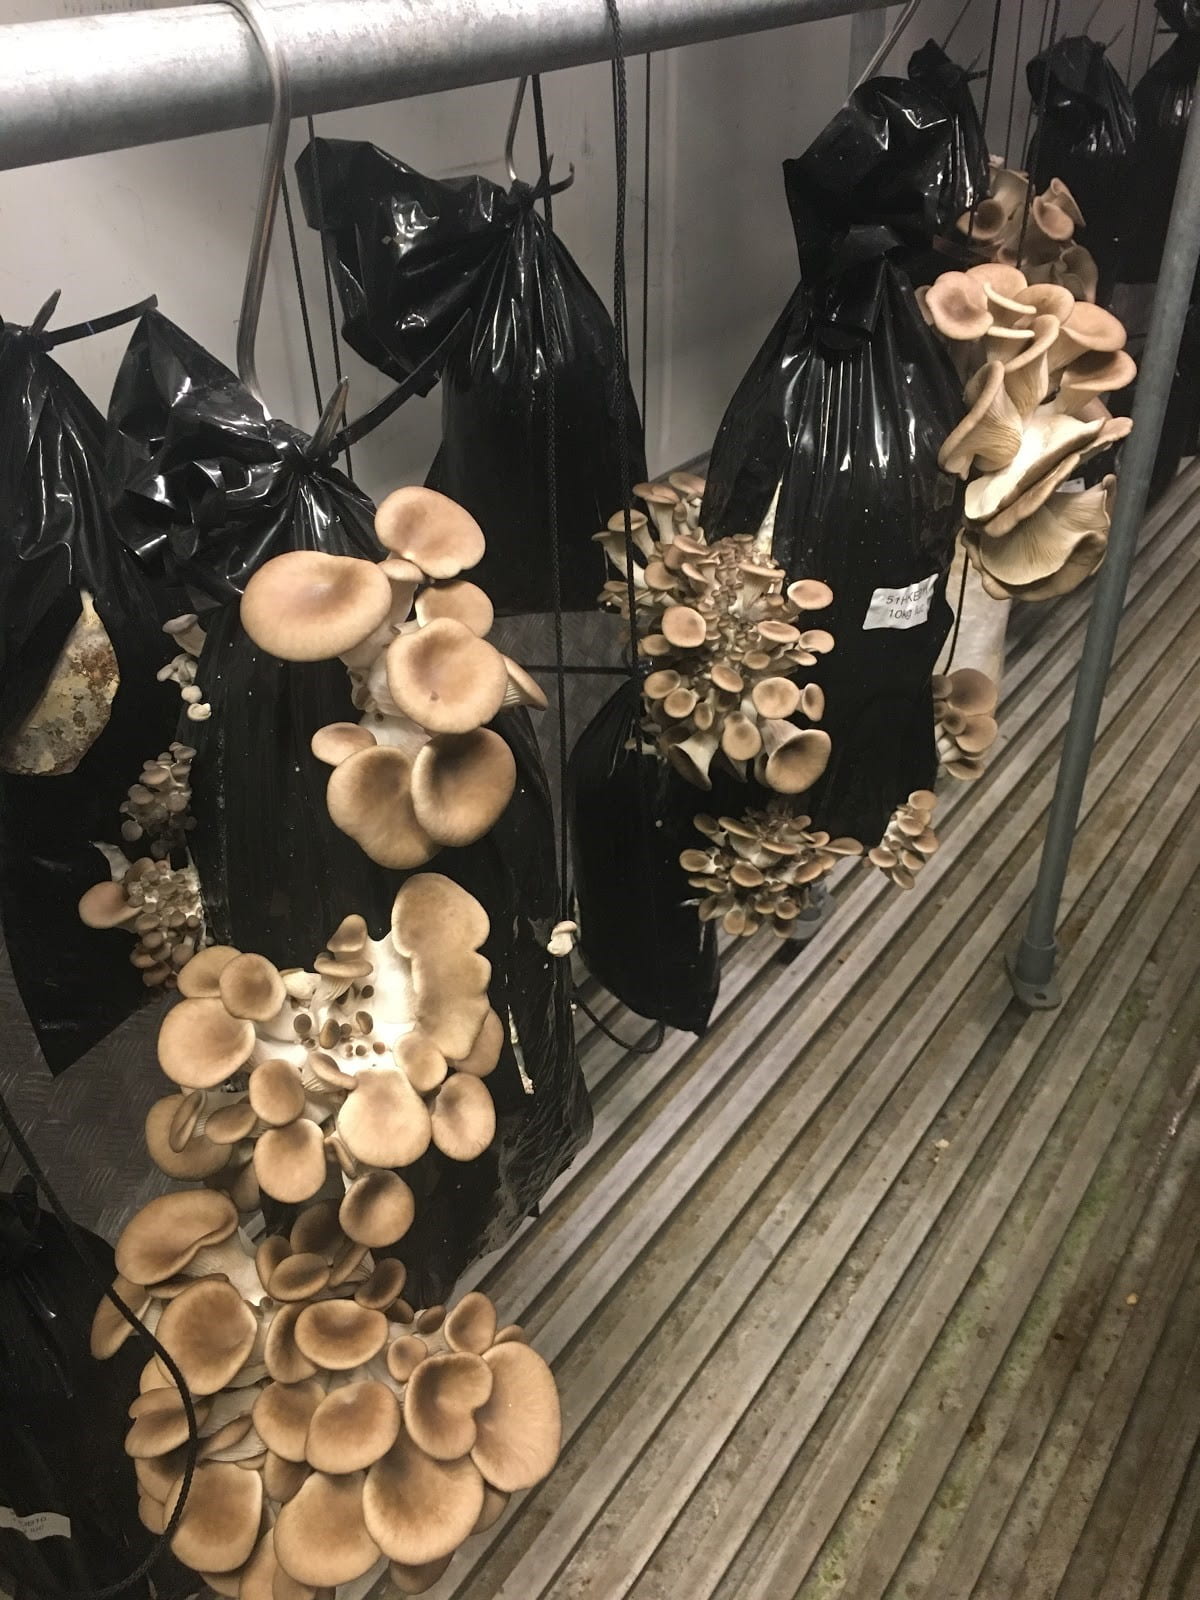 Mushrooms grow out of hanging black bags